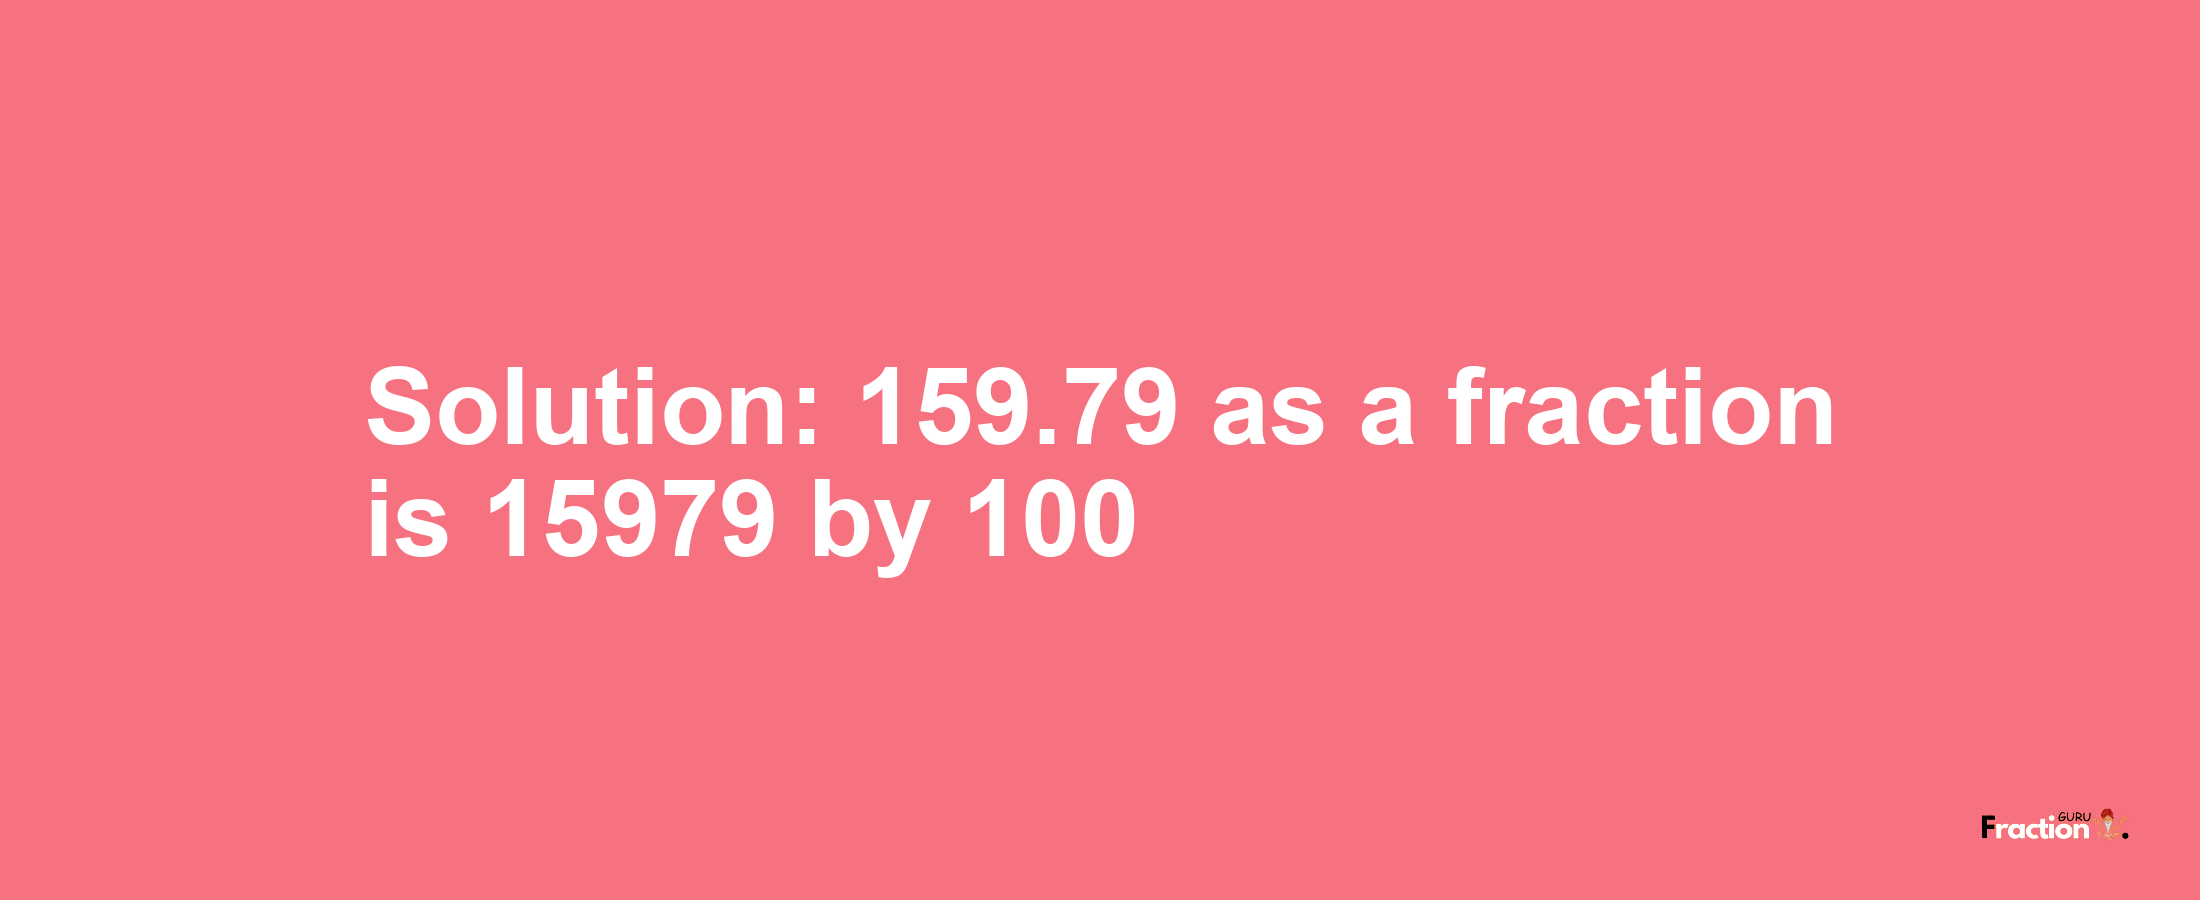 Solution:159.79 as a fraction is 15979/100